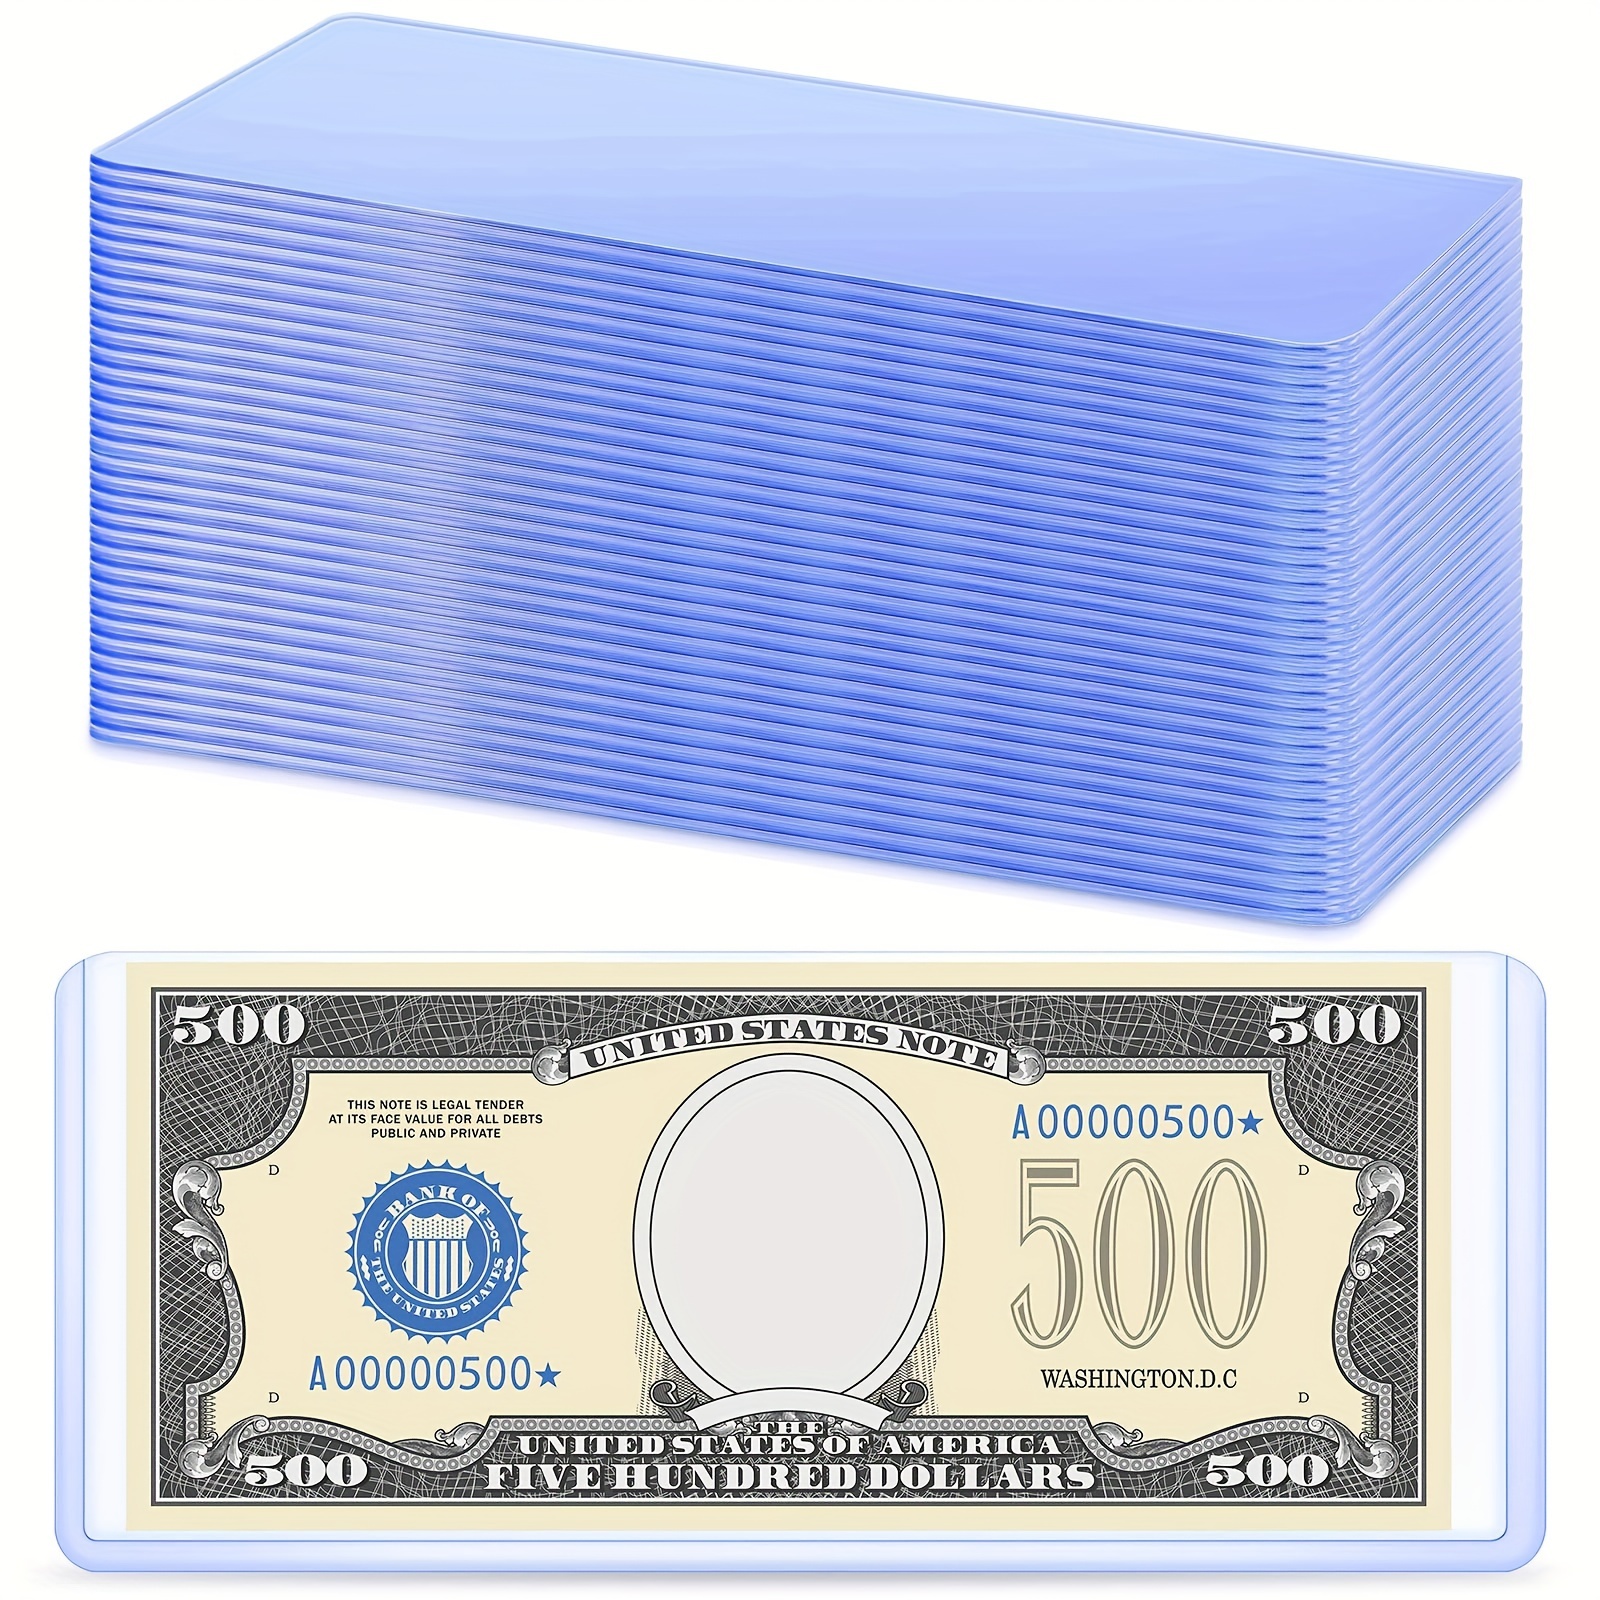  100 Pieces Clear Paper Money Holder for Collectors with  Storage Case, Dollar Bill Holder Plastic Currency Sleeves Holders Money  Sleeve for Bills, Album Banknotes Stamp Paper Protector Slab Holder 